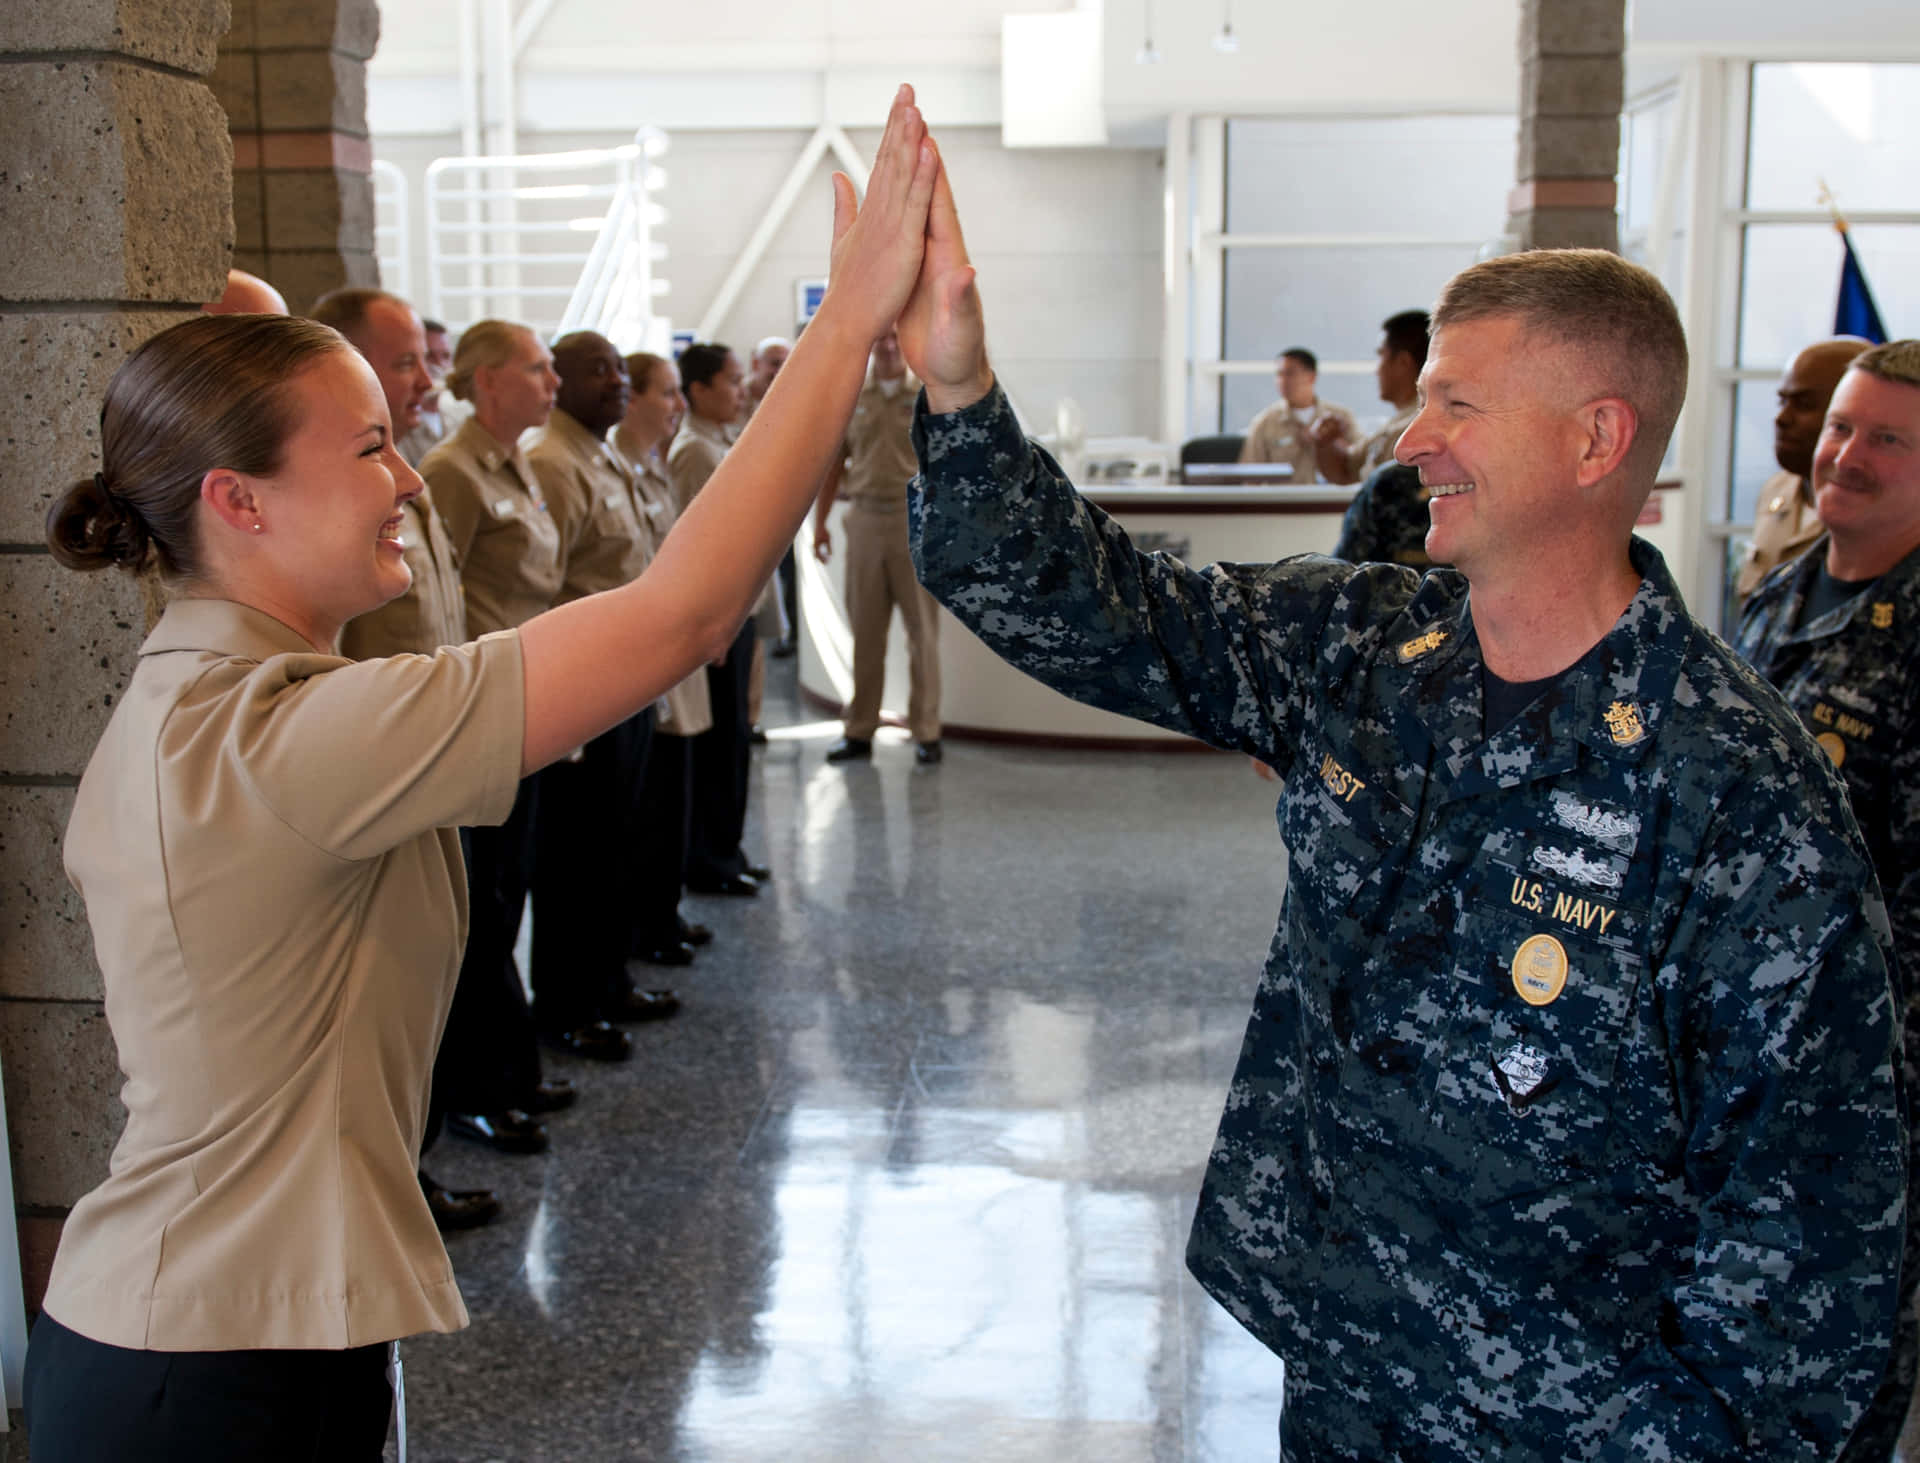 High Five Navy Soldiers Pictures